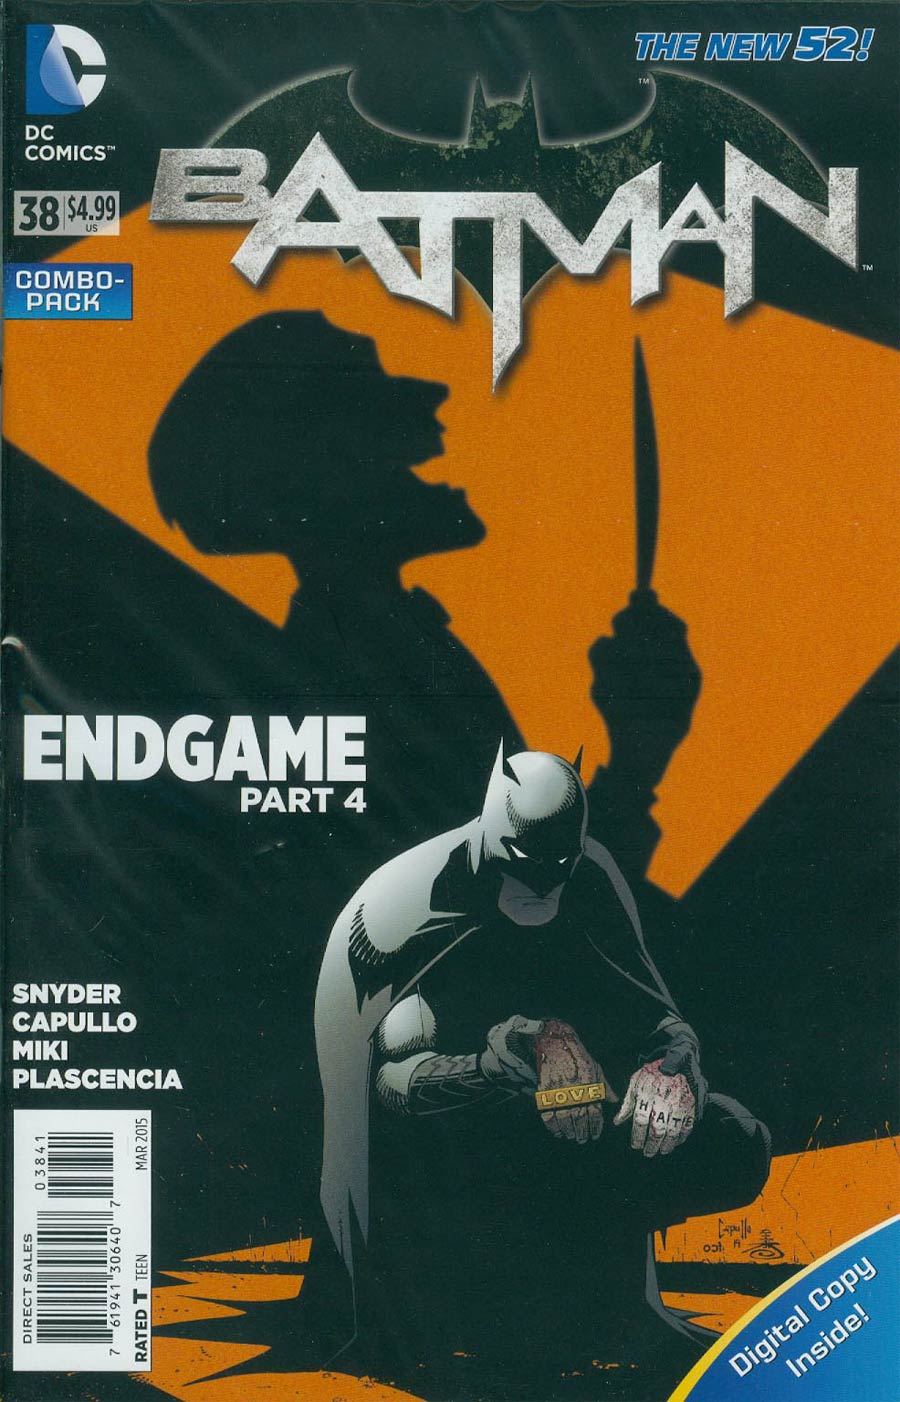 Batman Vol 2 #38 Cover C Combo Pack With Polybag